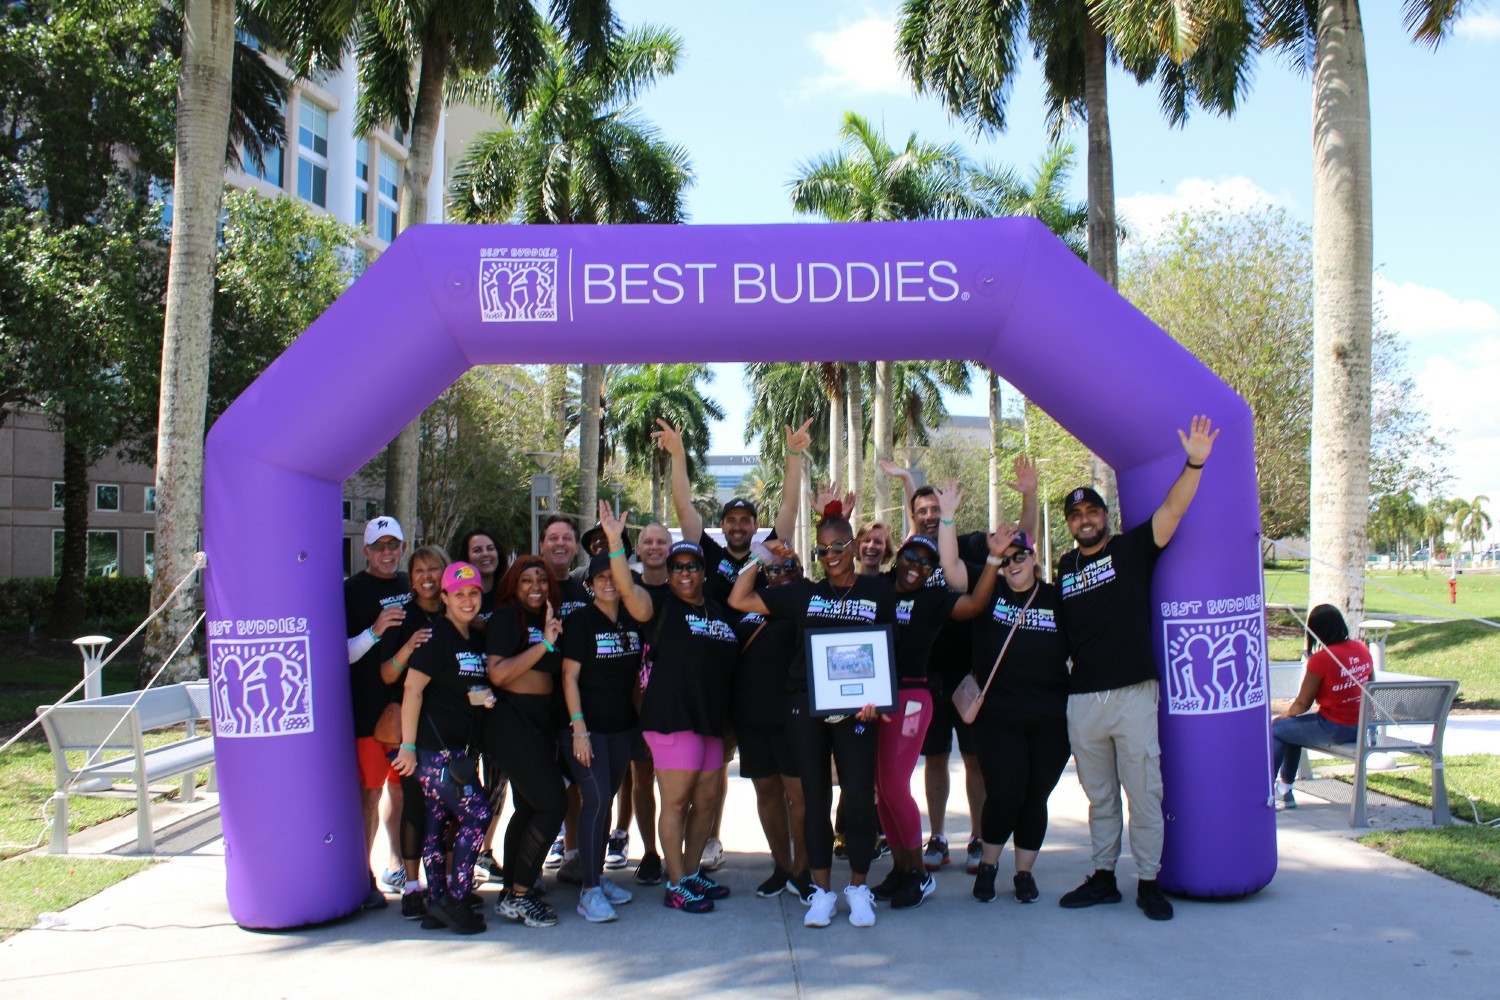 Universal Joins Best Buddies to Support Inclusion!
